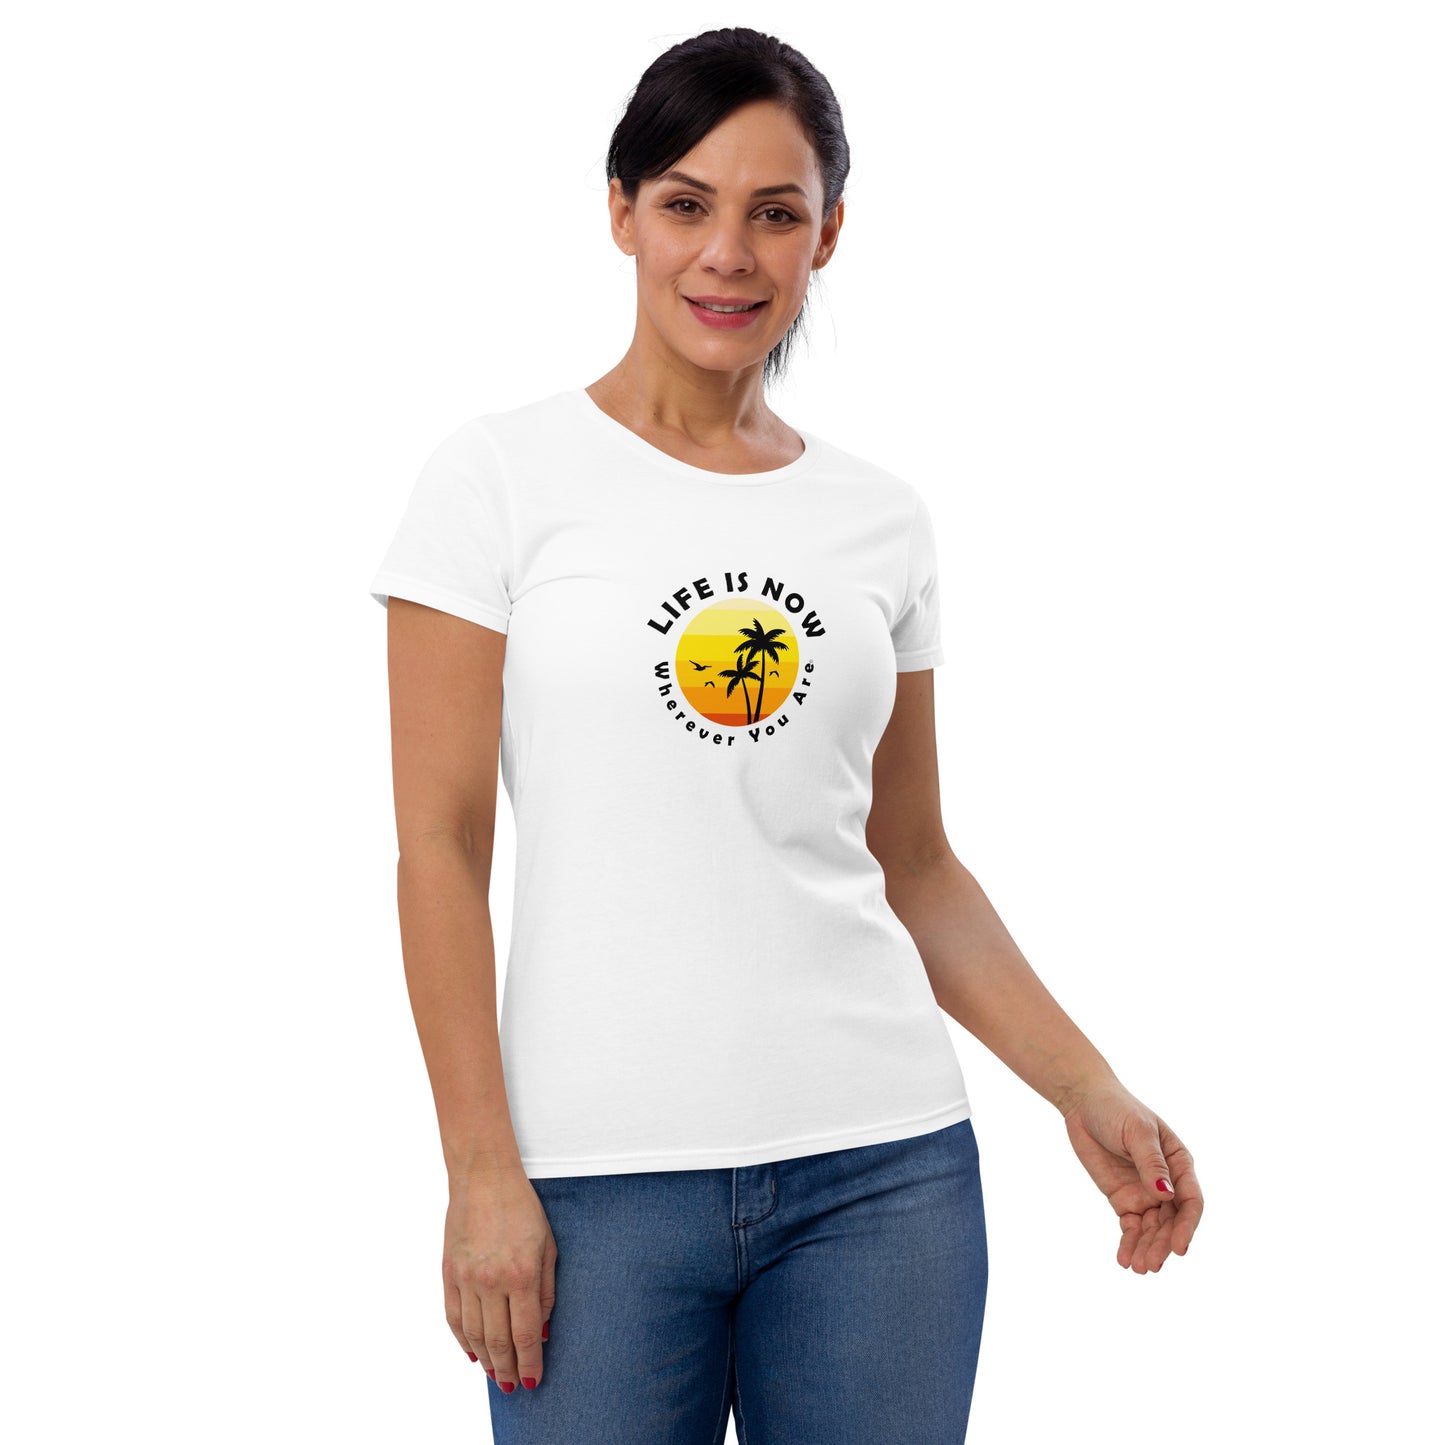 LiFE is NOW...Wherever You Are Palm Women's short sleeve t-shirt